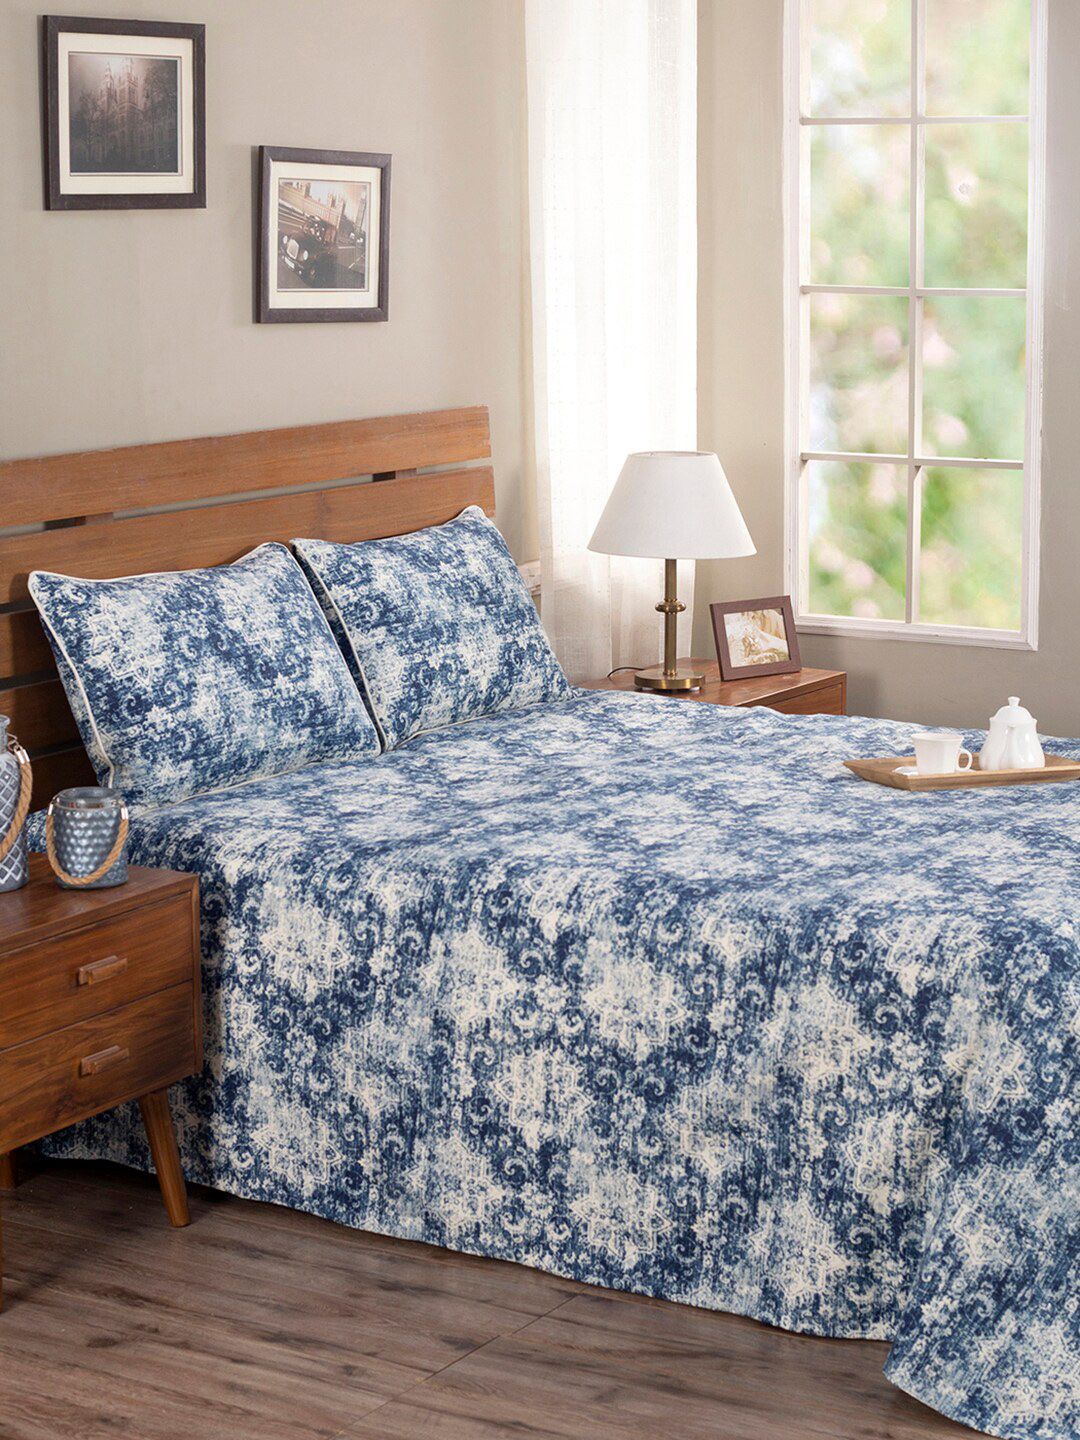 MASPAR Blue & White Printed Double Queen Bed Cover With Pillow Covers Price in India